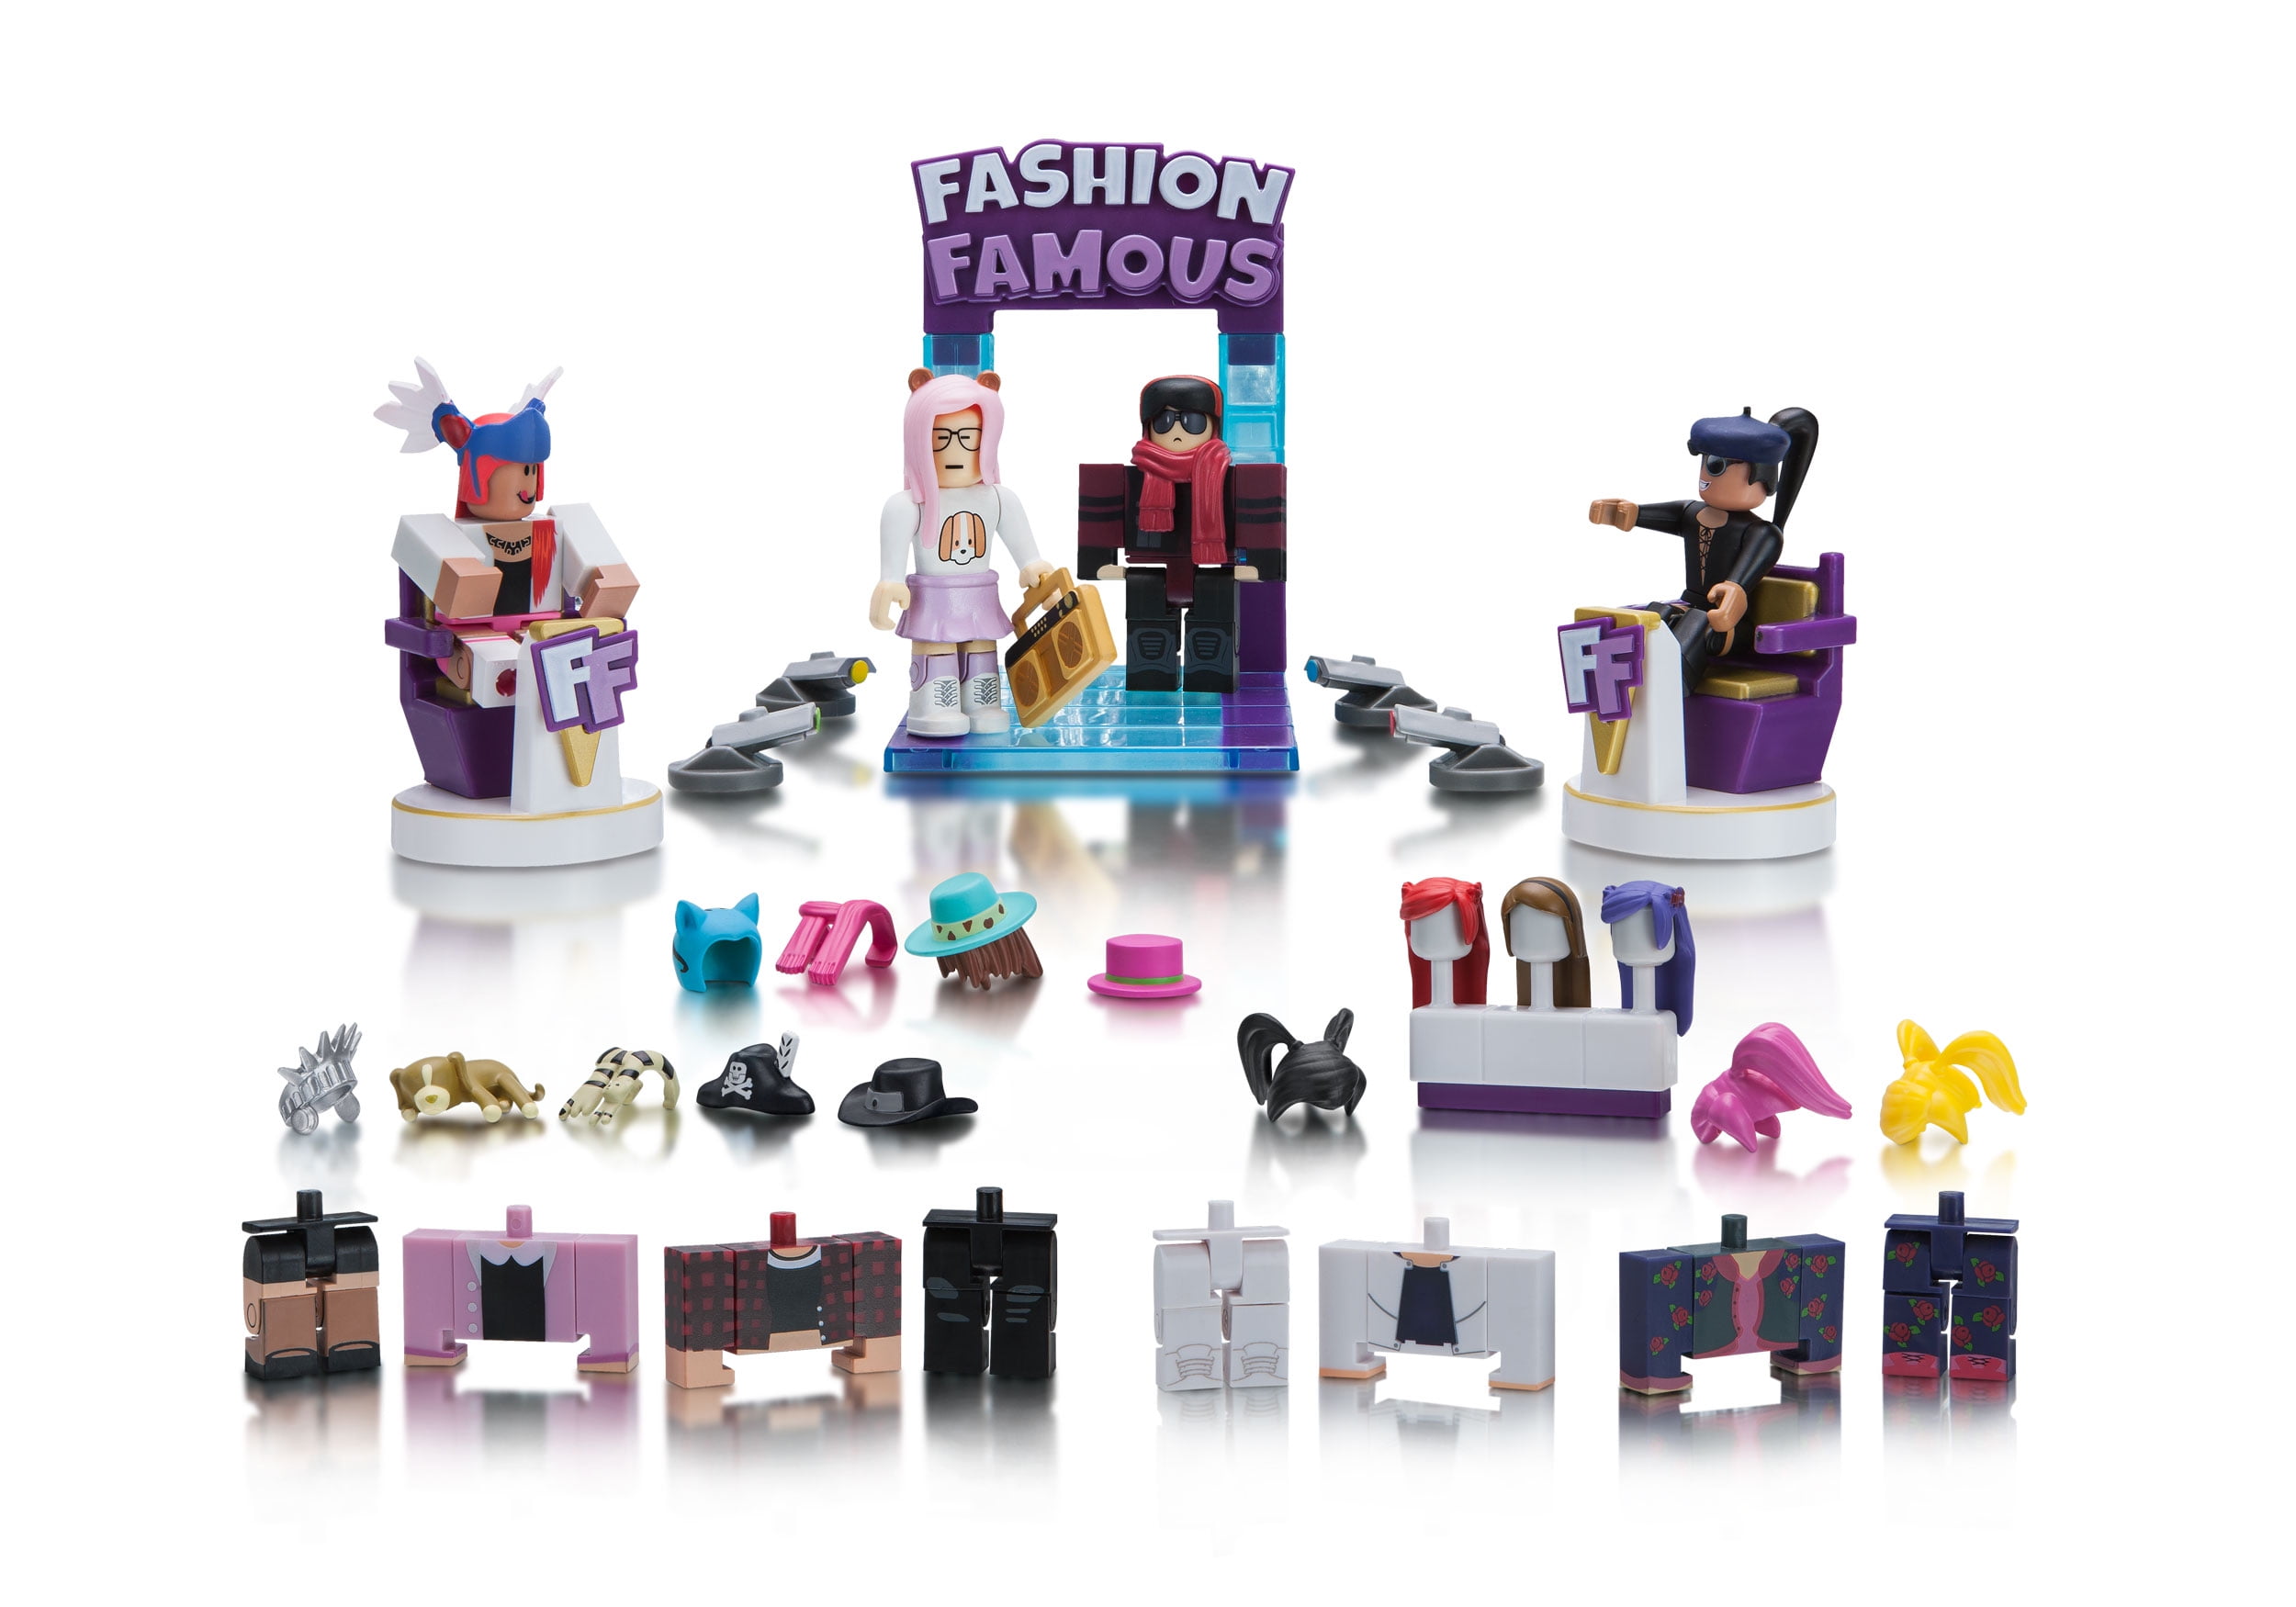 Roblox Celebrity Fashion Famous Playset FREE SHIPPING!